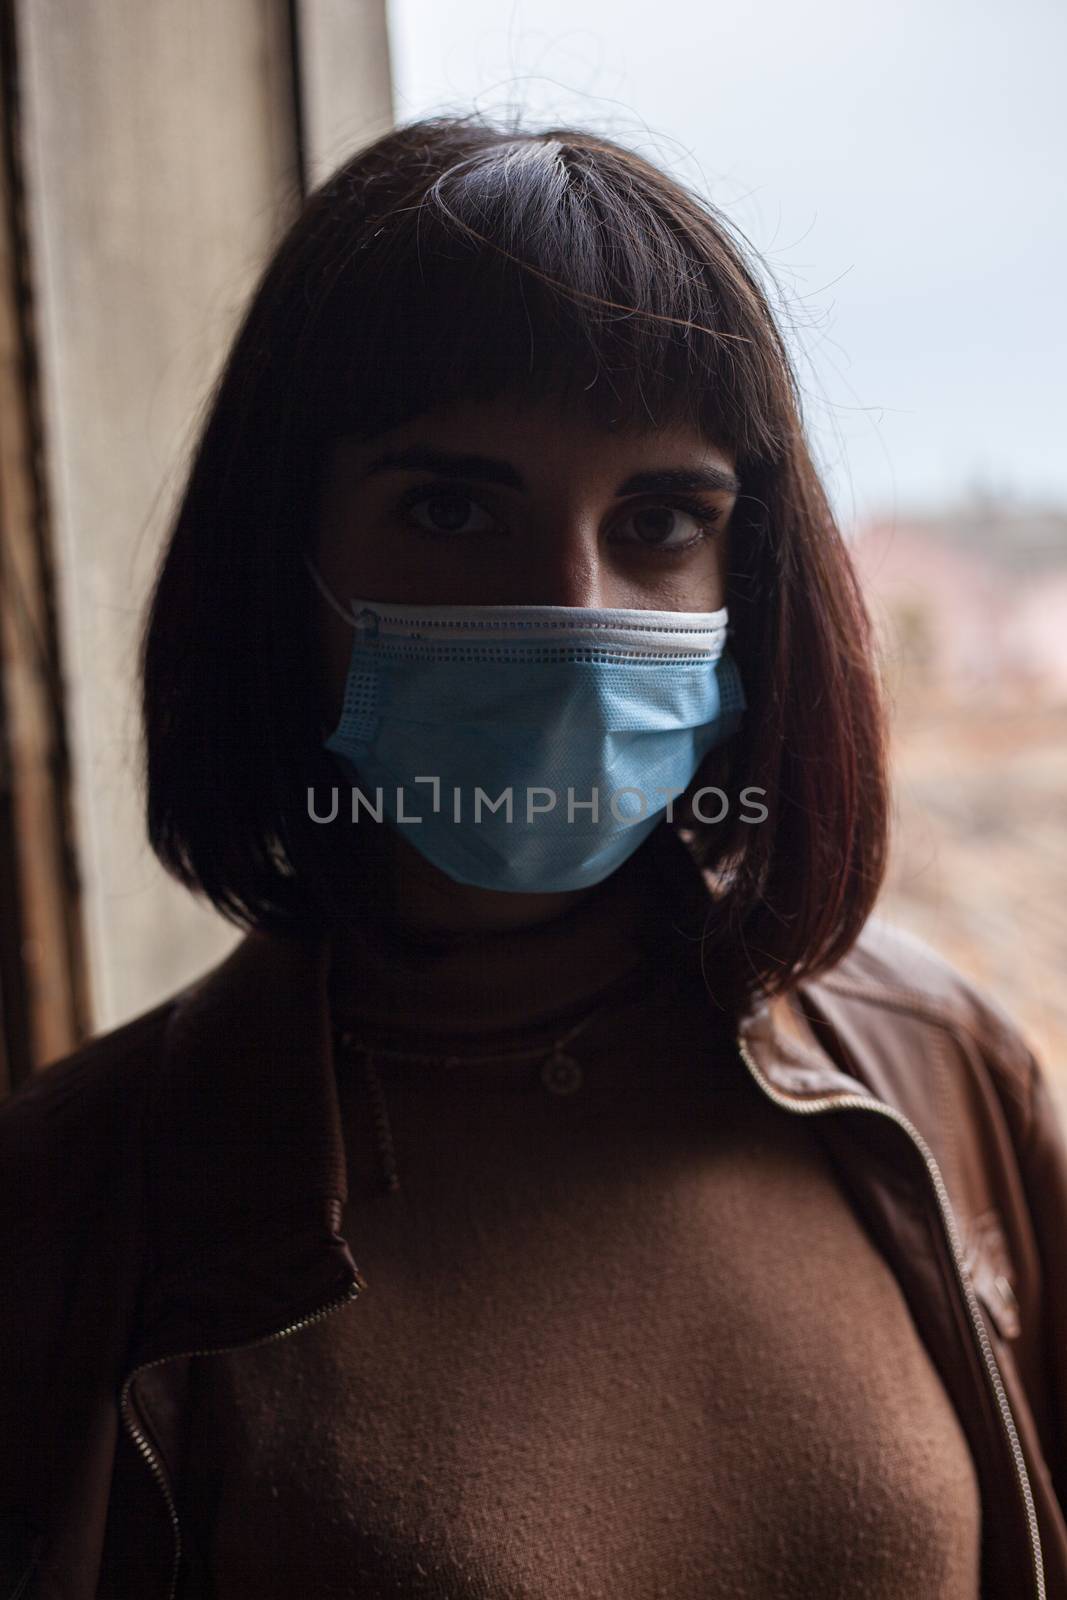 Girl with medical mask at window 21 by pippocarlot